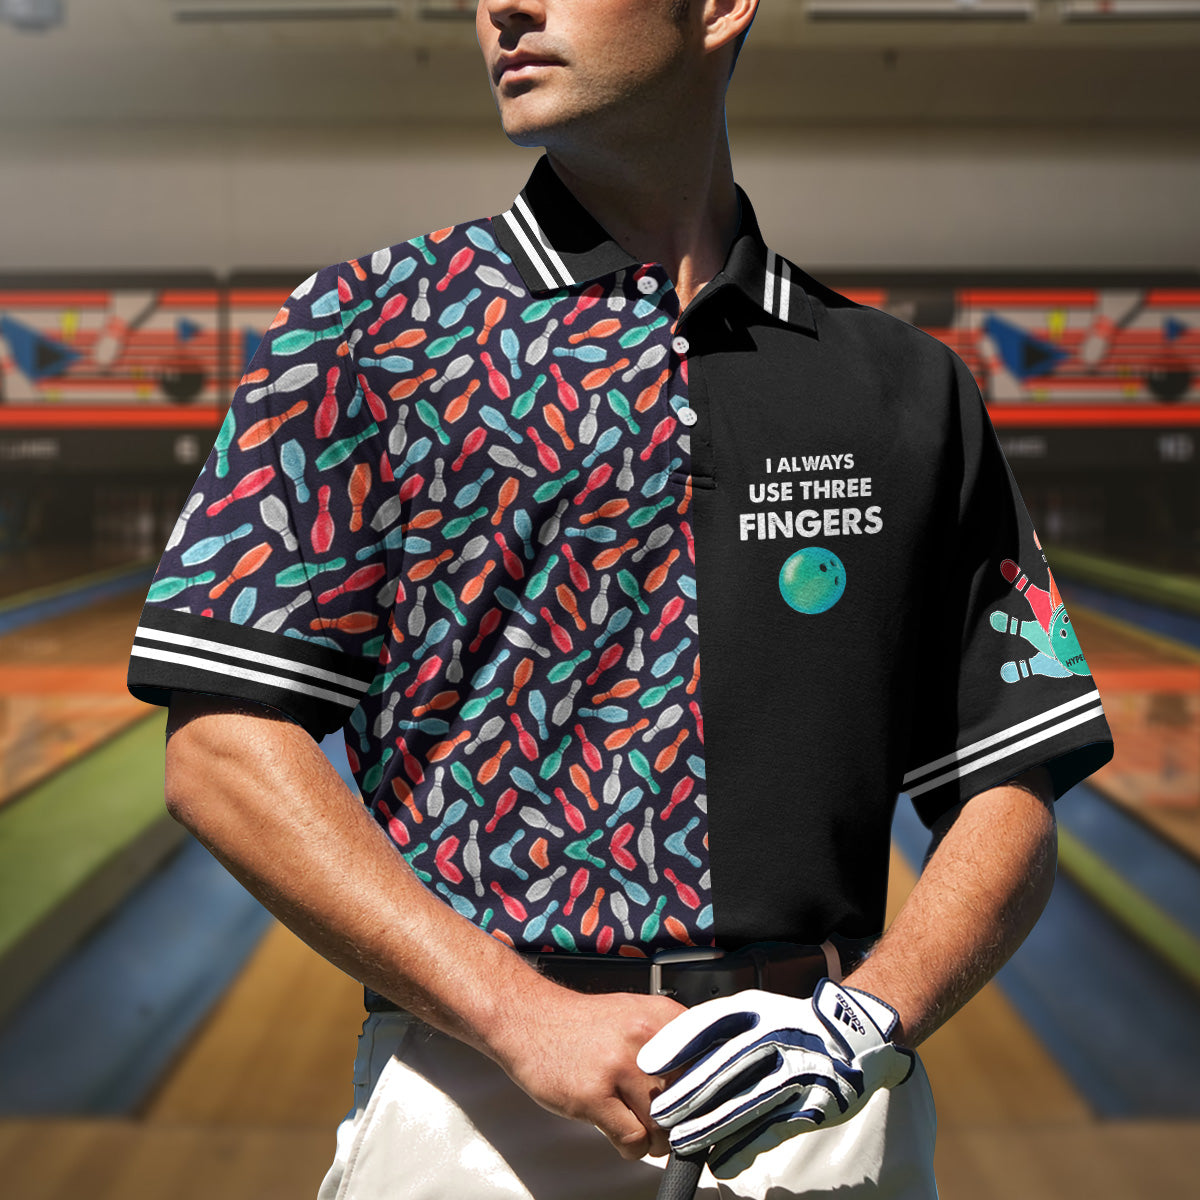 I Always Use Three Fingers Polo Shirt/ Custom Bowling Polo Shirt Design For Men/ 10 Pin Sowling Shirts Coolspod